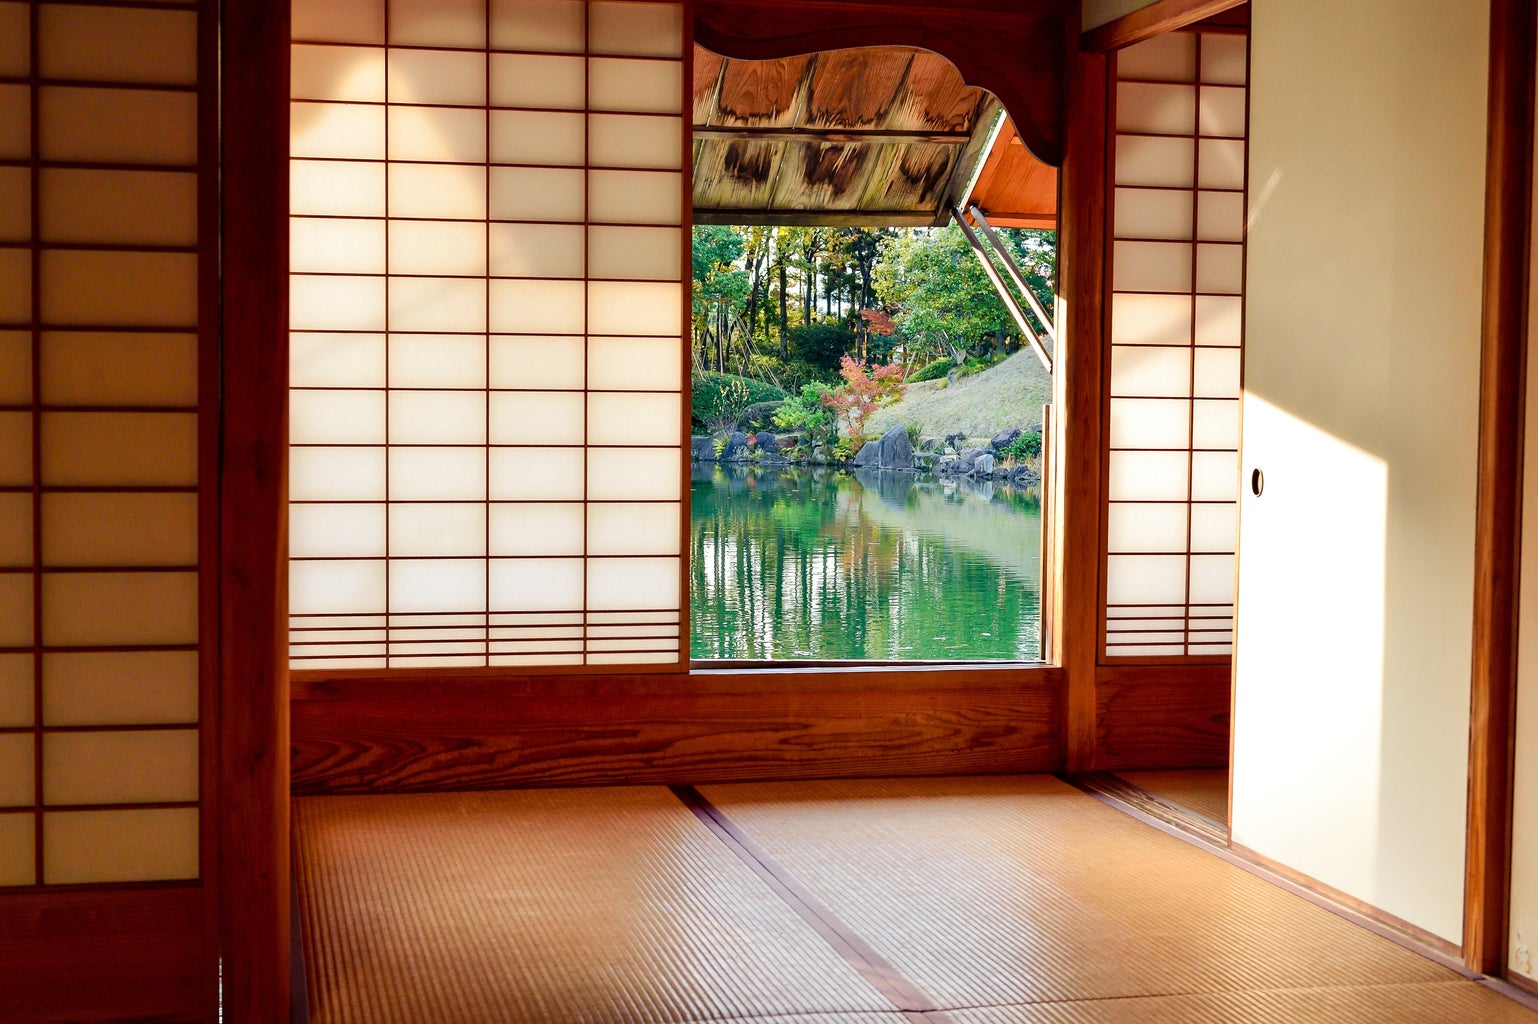 Brown door and traditional Japanese floors looking over nature